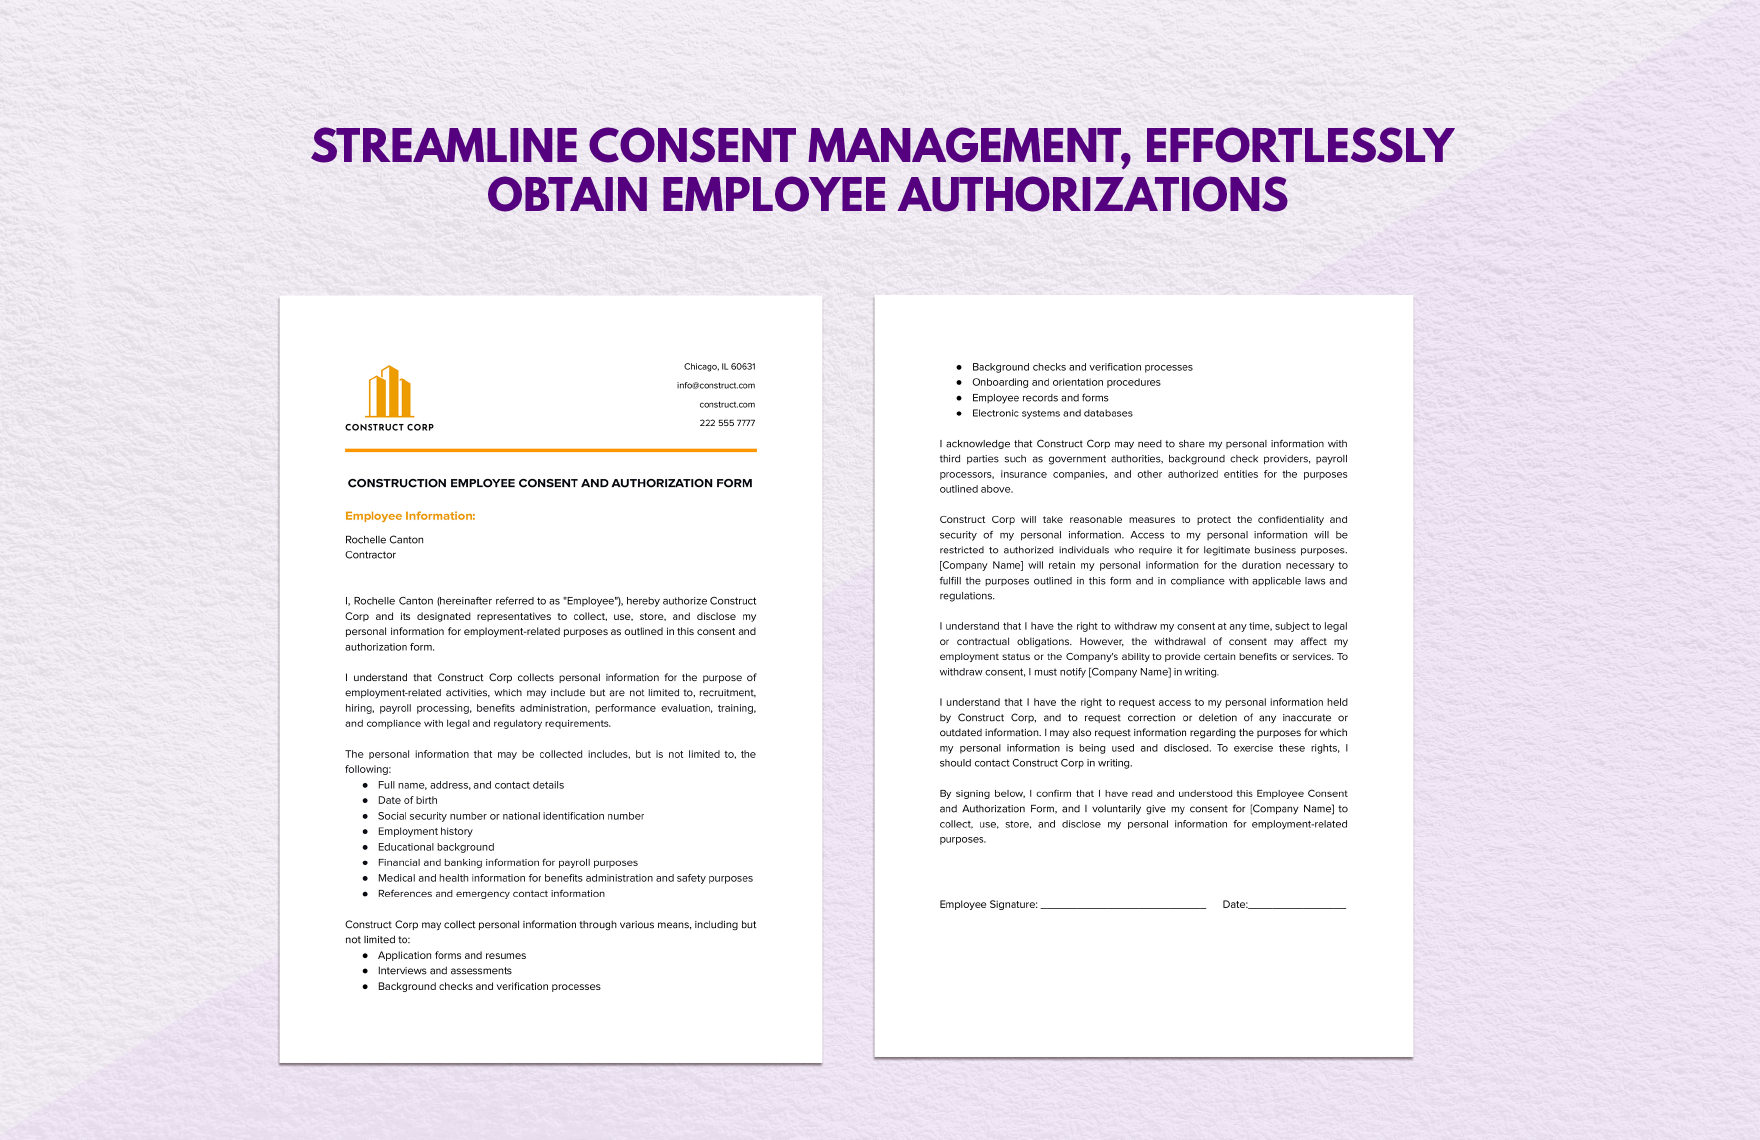 Construction Employee Consent and Authorization Form